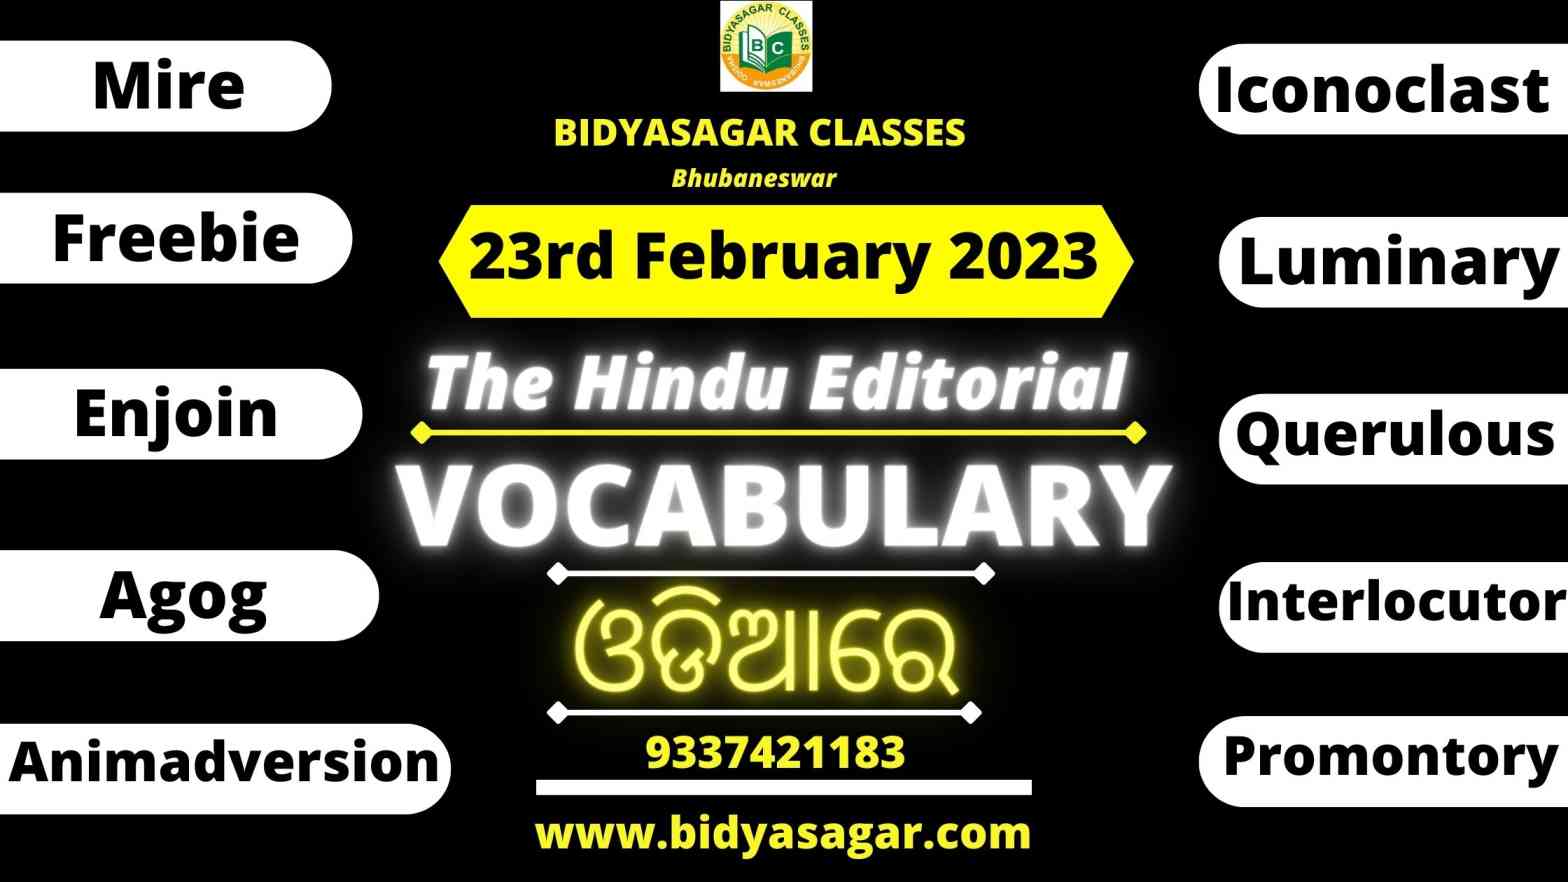 The Hindu Editorial Vocabulary of 23rd February 2023